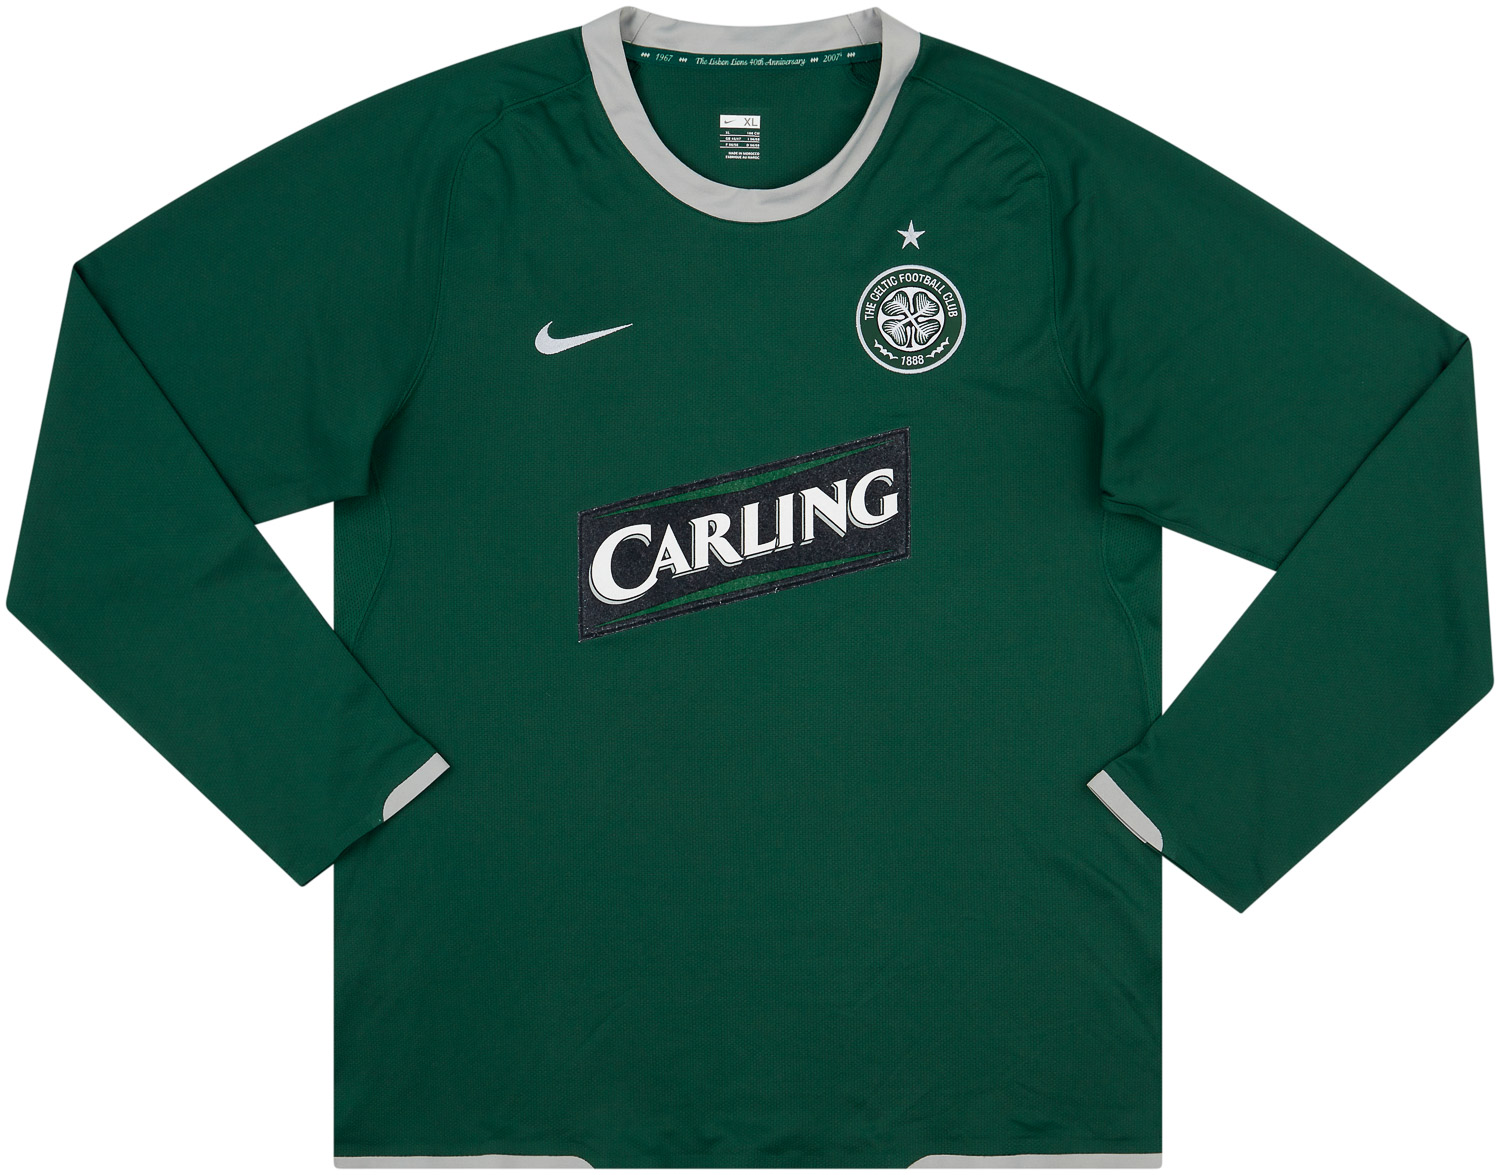 2007-08 Celtic Player Issue Away Shirt - 8/10 - ()